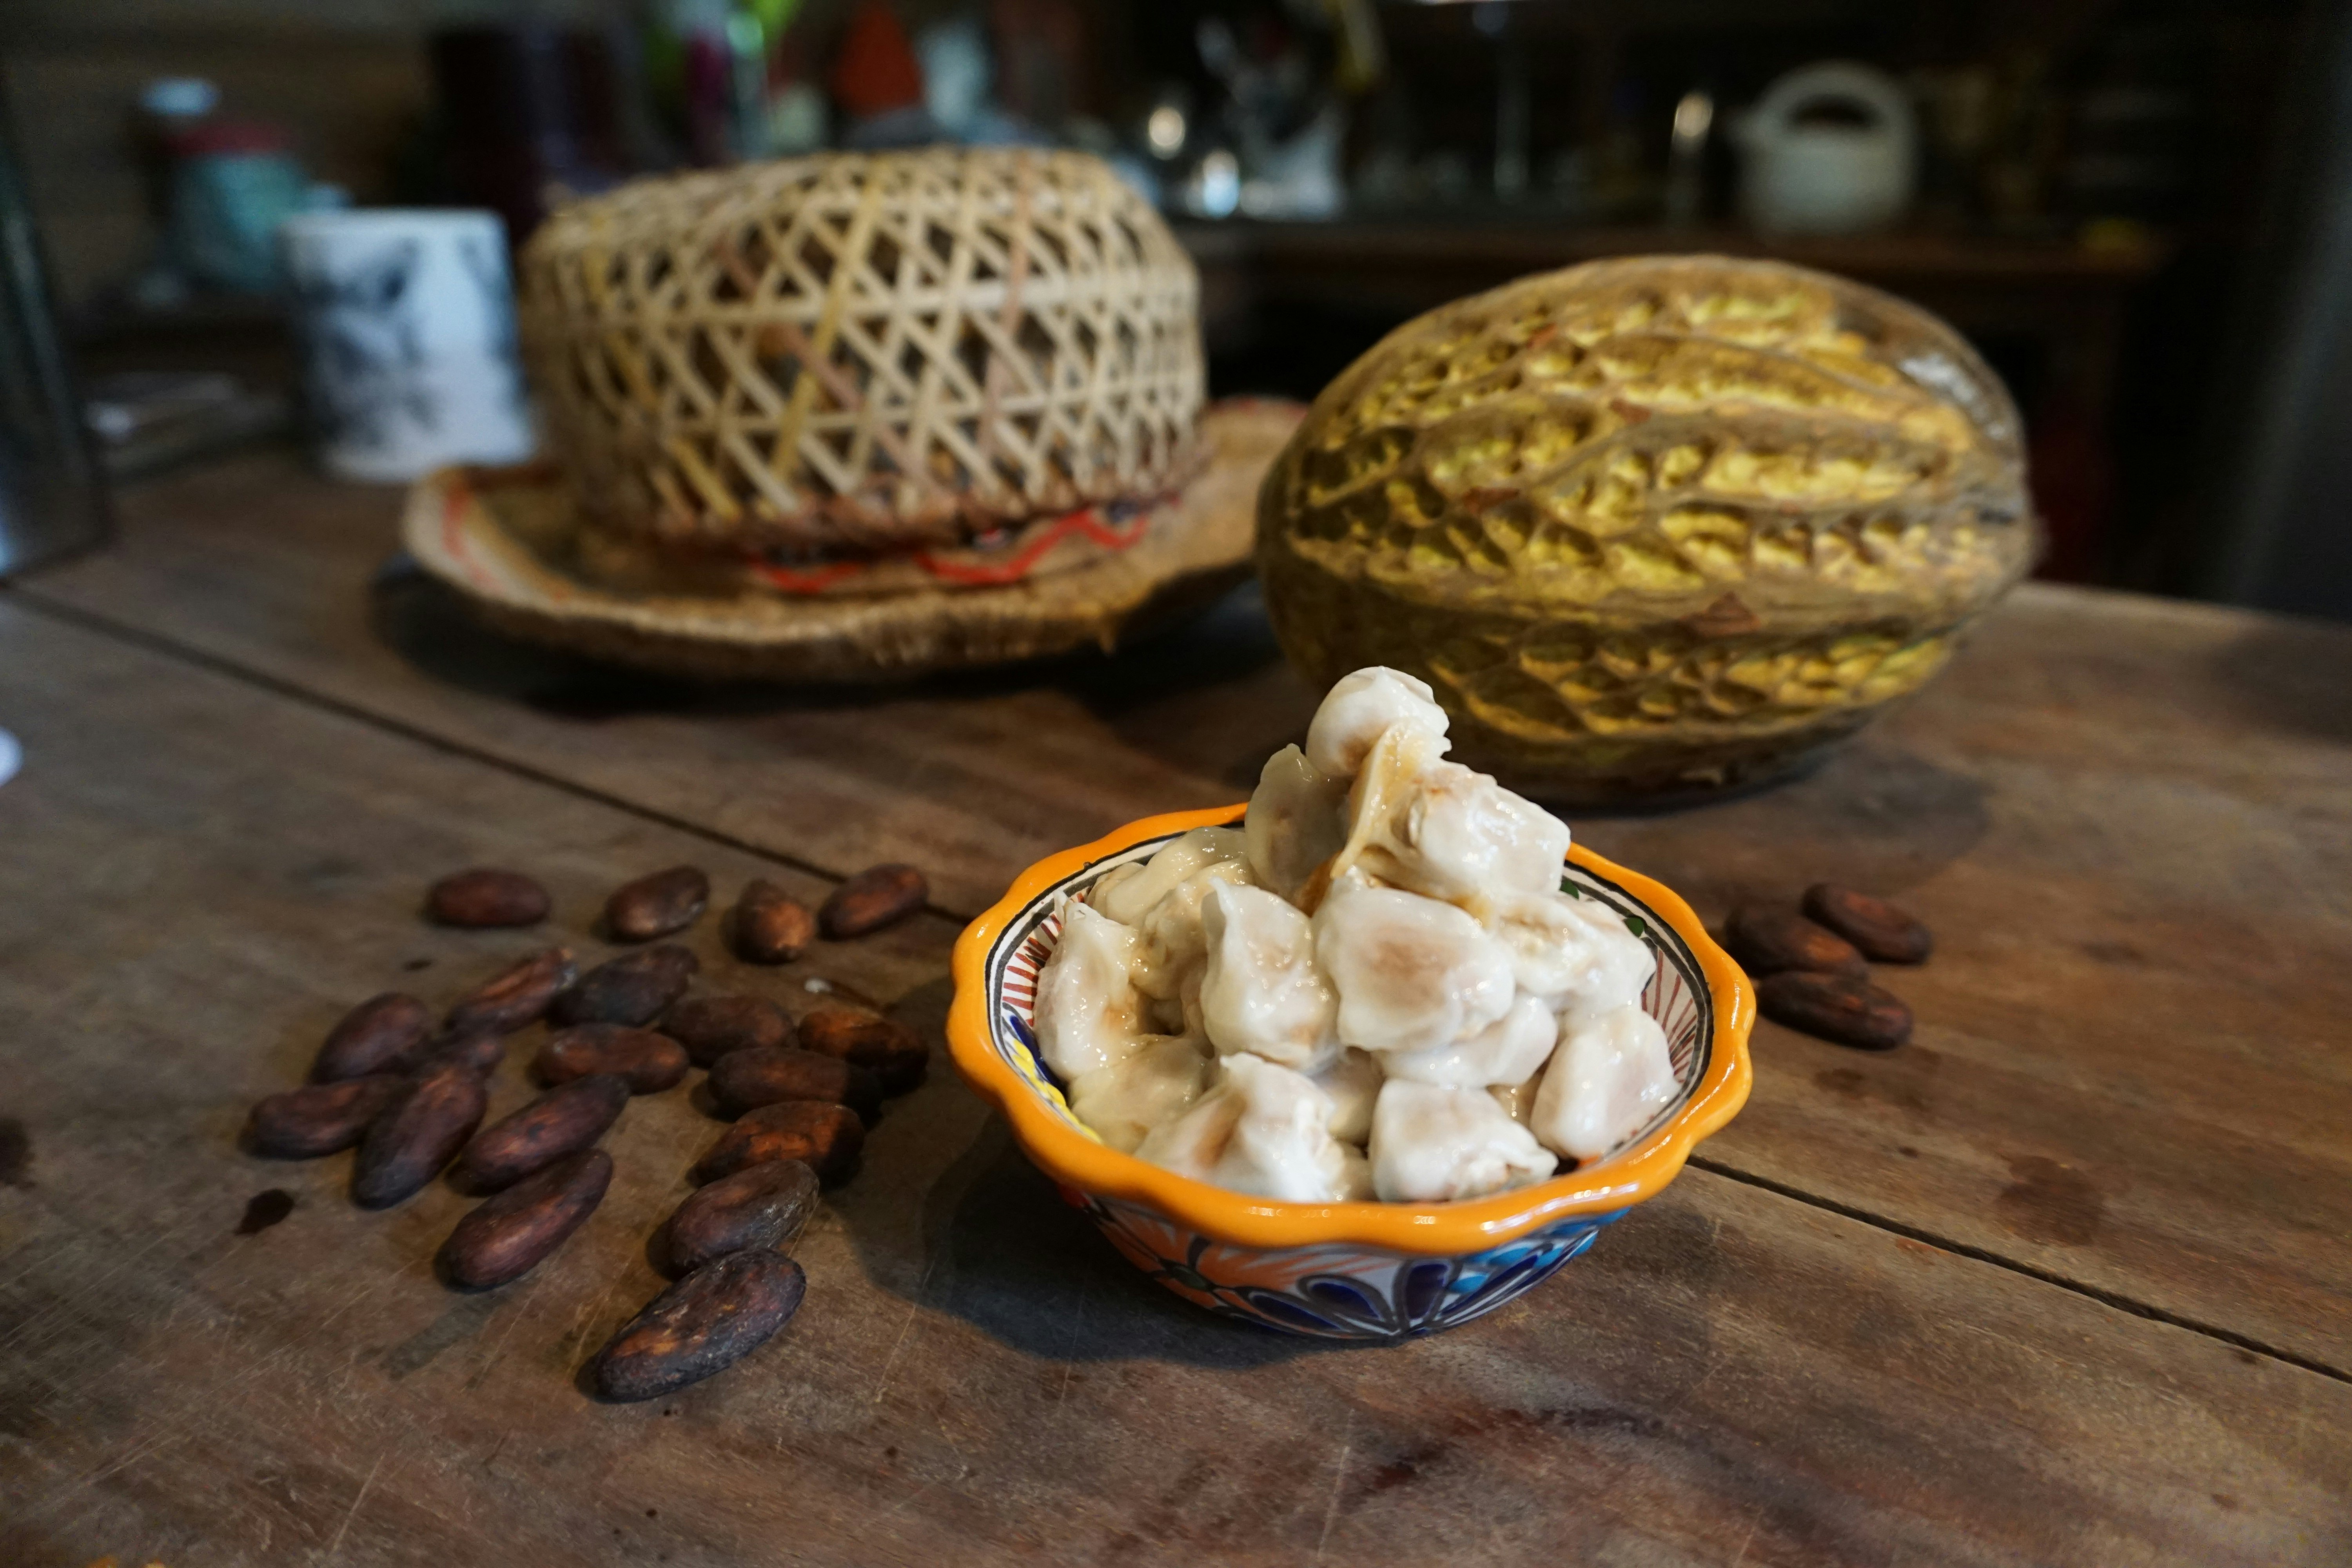 A pile of cacao fruit pods sit in a bowl, next to the bowl are roasted cacao beans. In the background is a full cacao fruit and a straw hat. 